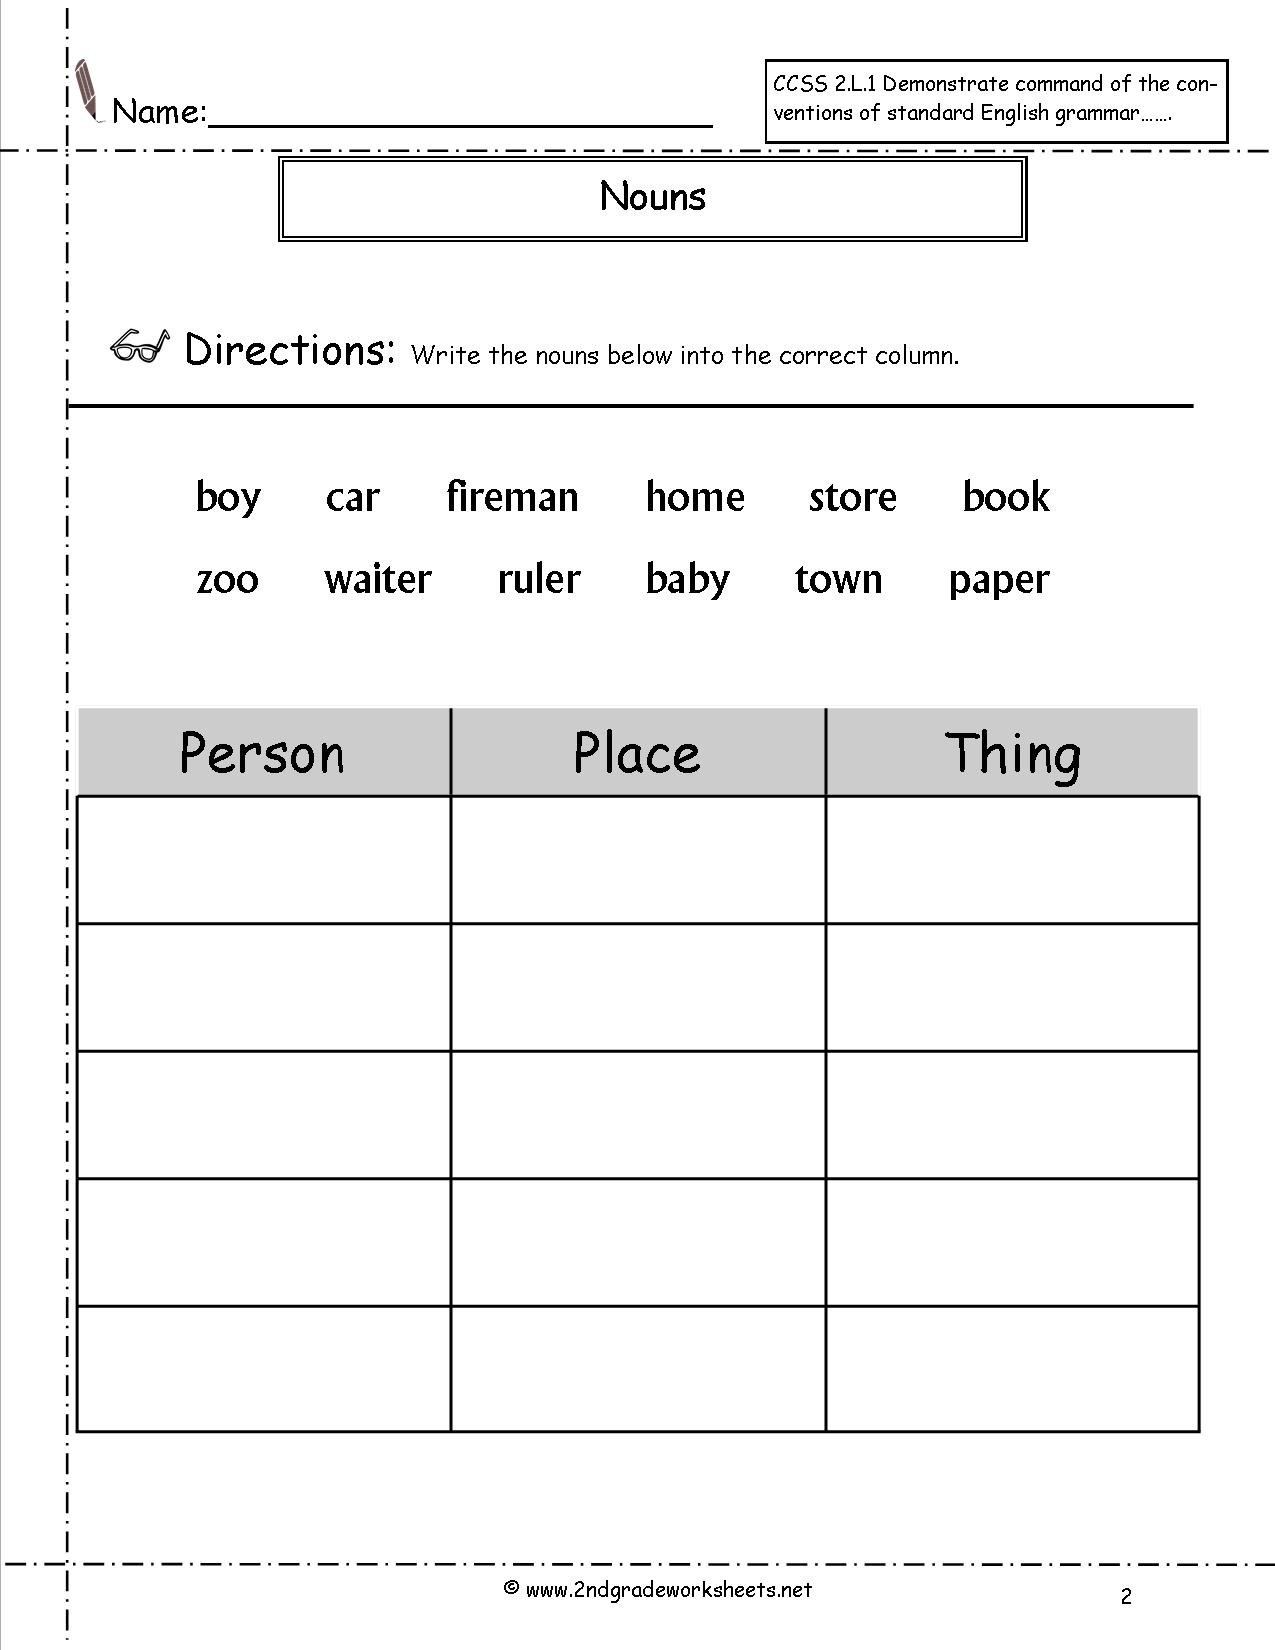 Nouns Worksheets And Printouts For Noun Worksheets For Grade 1